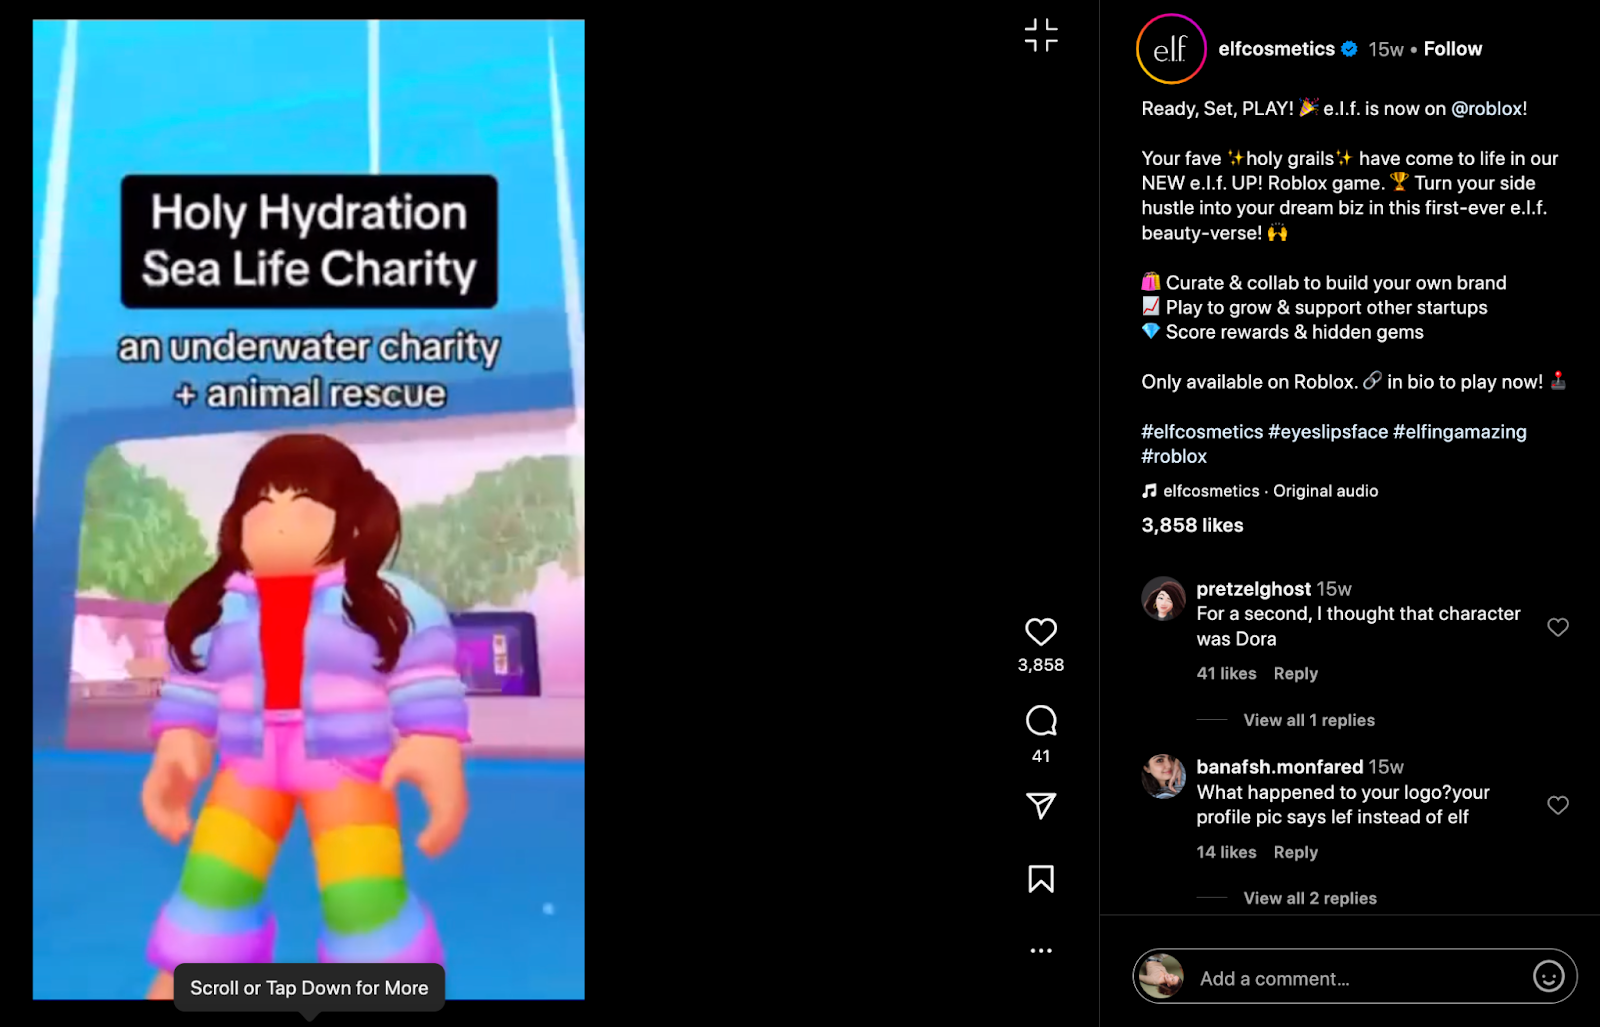 Instagram screenshot of @elfcosmetics post of the e.l.f. UP! Roblox game featuring a Roblox character under the text "Holy Hydration Sea Life Charity, an underwater charity + animal rescue"